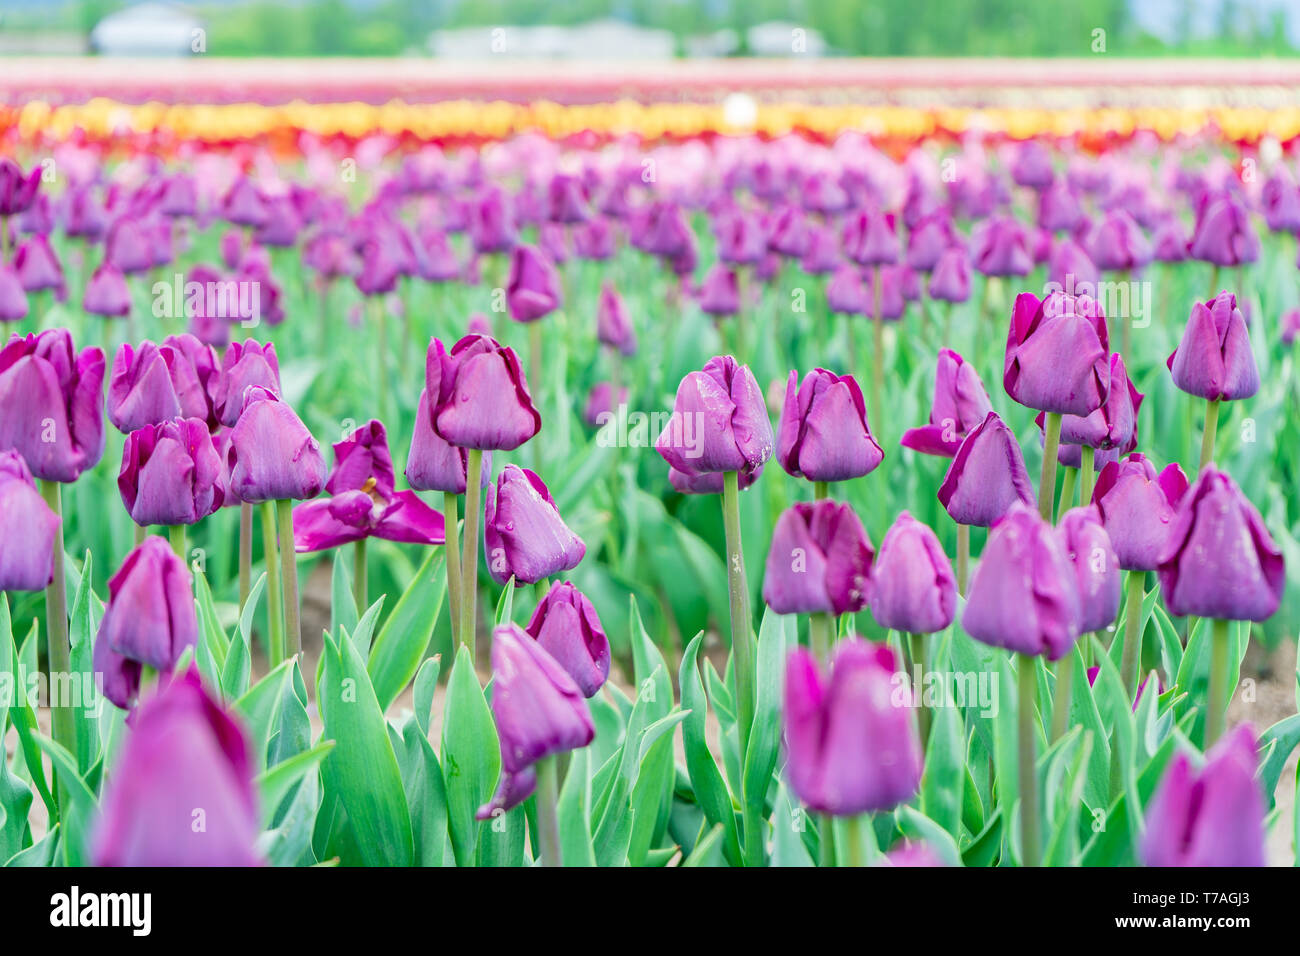 Flower field of purple tulips blooming. Triumph tulip field, on a tulip farm. Foreground focus, with blurry colourful flowers in the background. Stock Photo